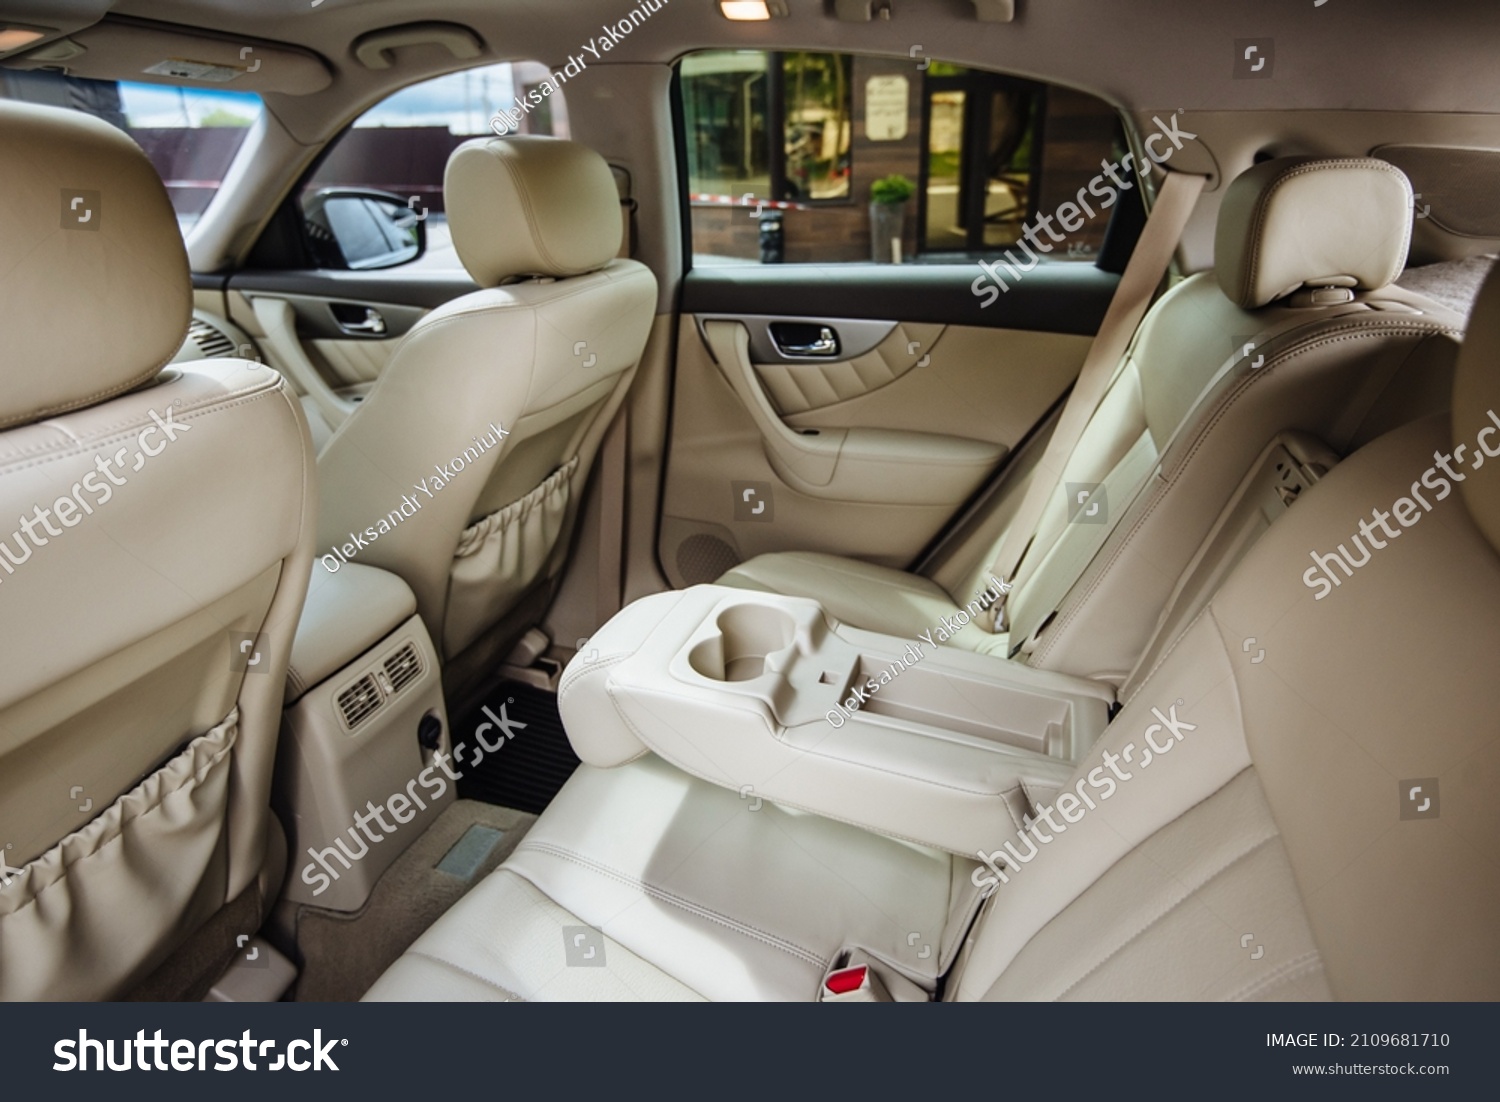 Luxury car interior made of white leather. Leather folding armrest armrest with cup holders in rear seats inside a vehicle. Clean leather interior: white rear seats, headrests and belts. #2109681710